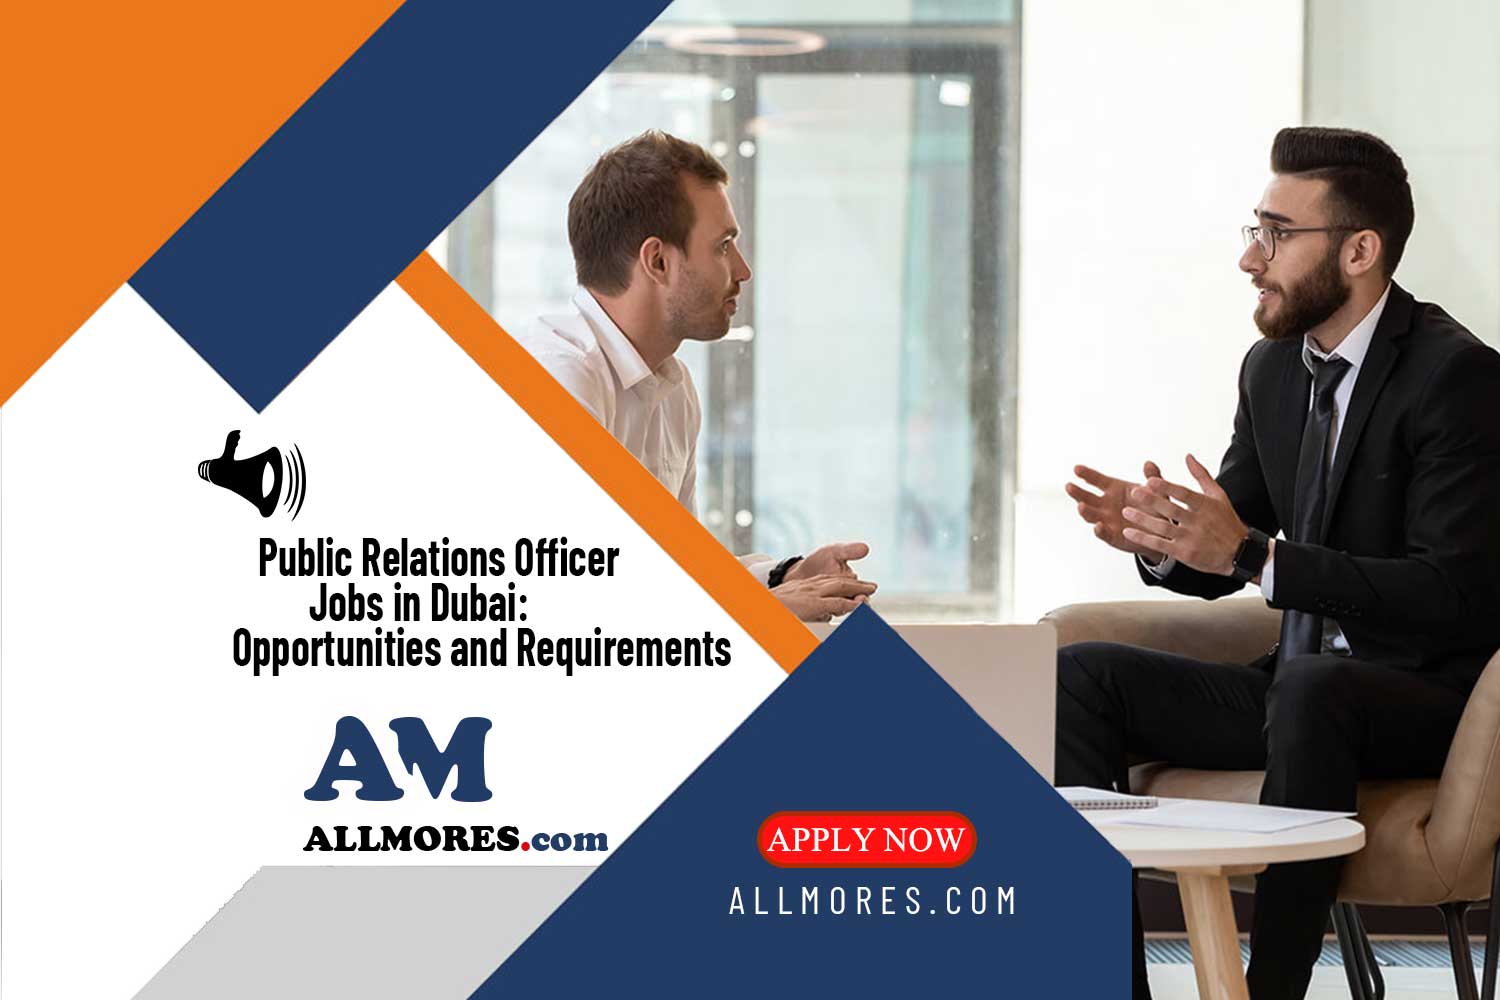 Public Relations Officer Jobs in Dubai: Opportunities and Requirements